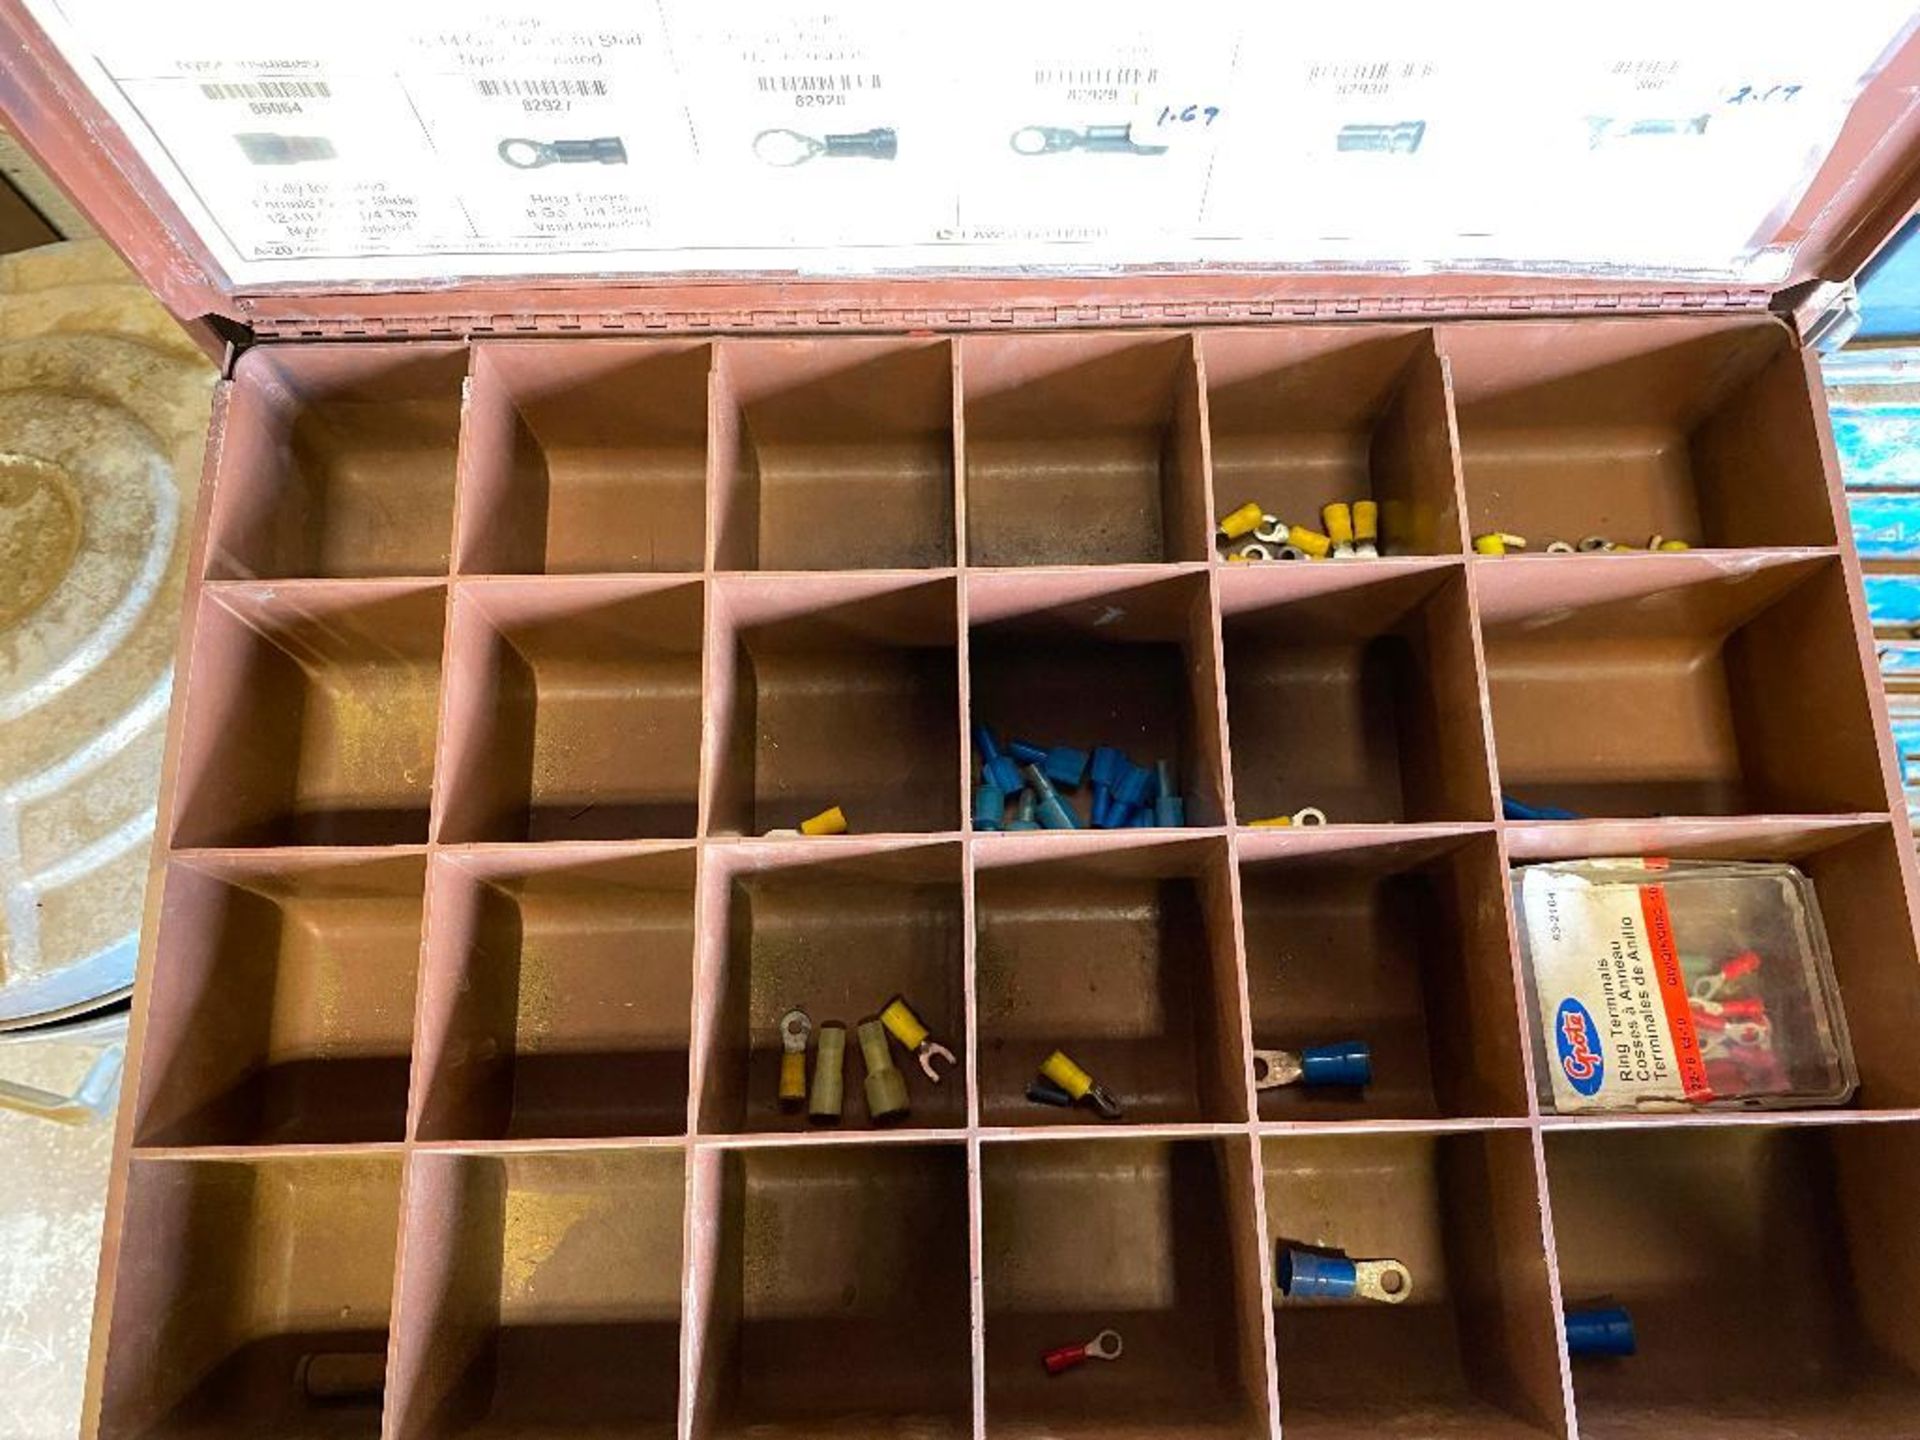 Lot of (14) Lawson Parts Drawers w/ Asst. Contents including, O-Rings, Fittings, Connectors, etc. - Image 7 of 15